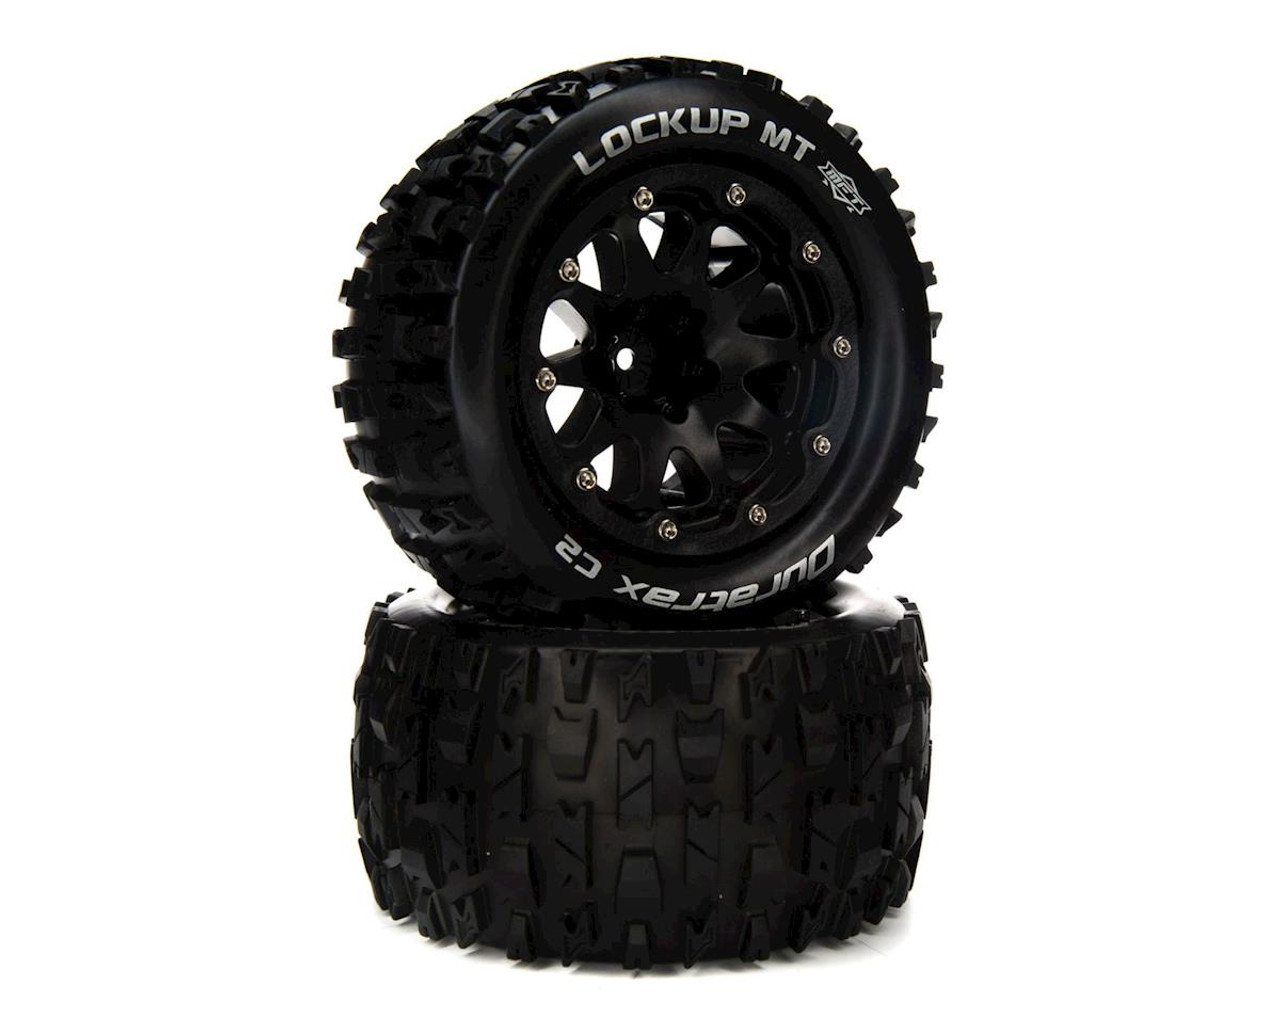 DuraTrax Lockup MT Belted 2.8" 2WD Monster Truck Tires w/14mm Hex (Black) (2)